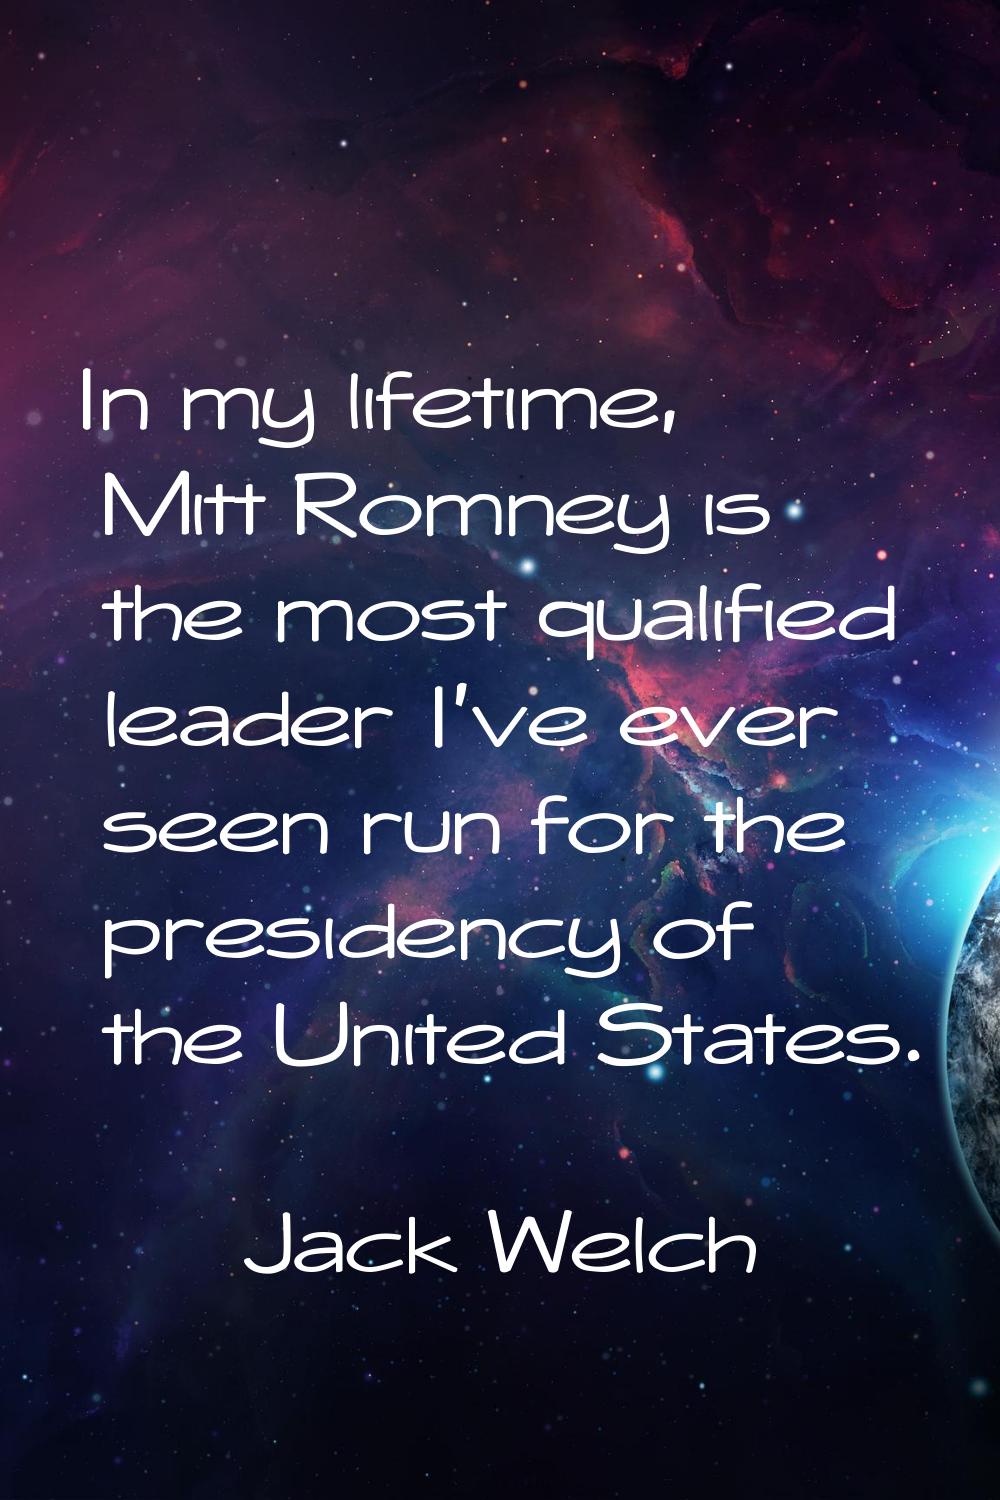 In my lifetime, Mitt Romney is the most qualified leader I've ever seen run for the presidency of t